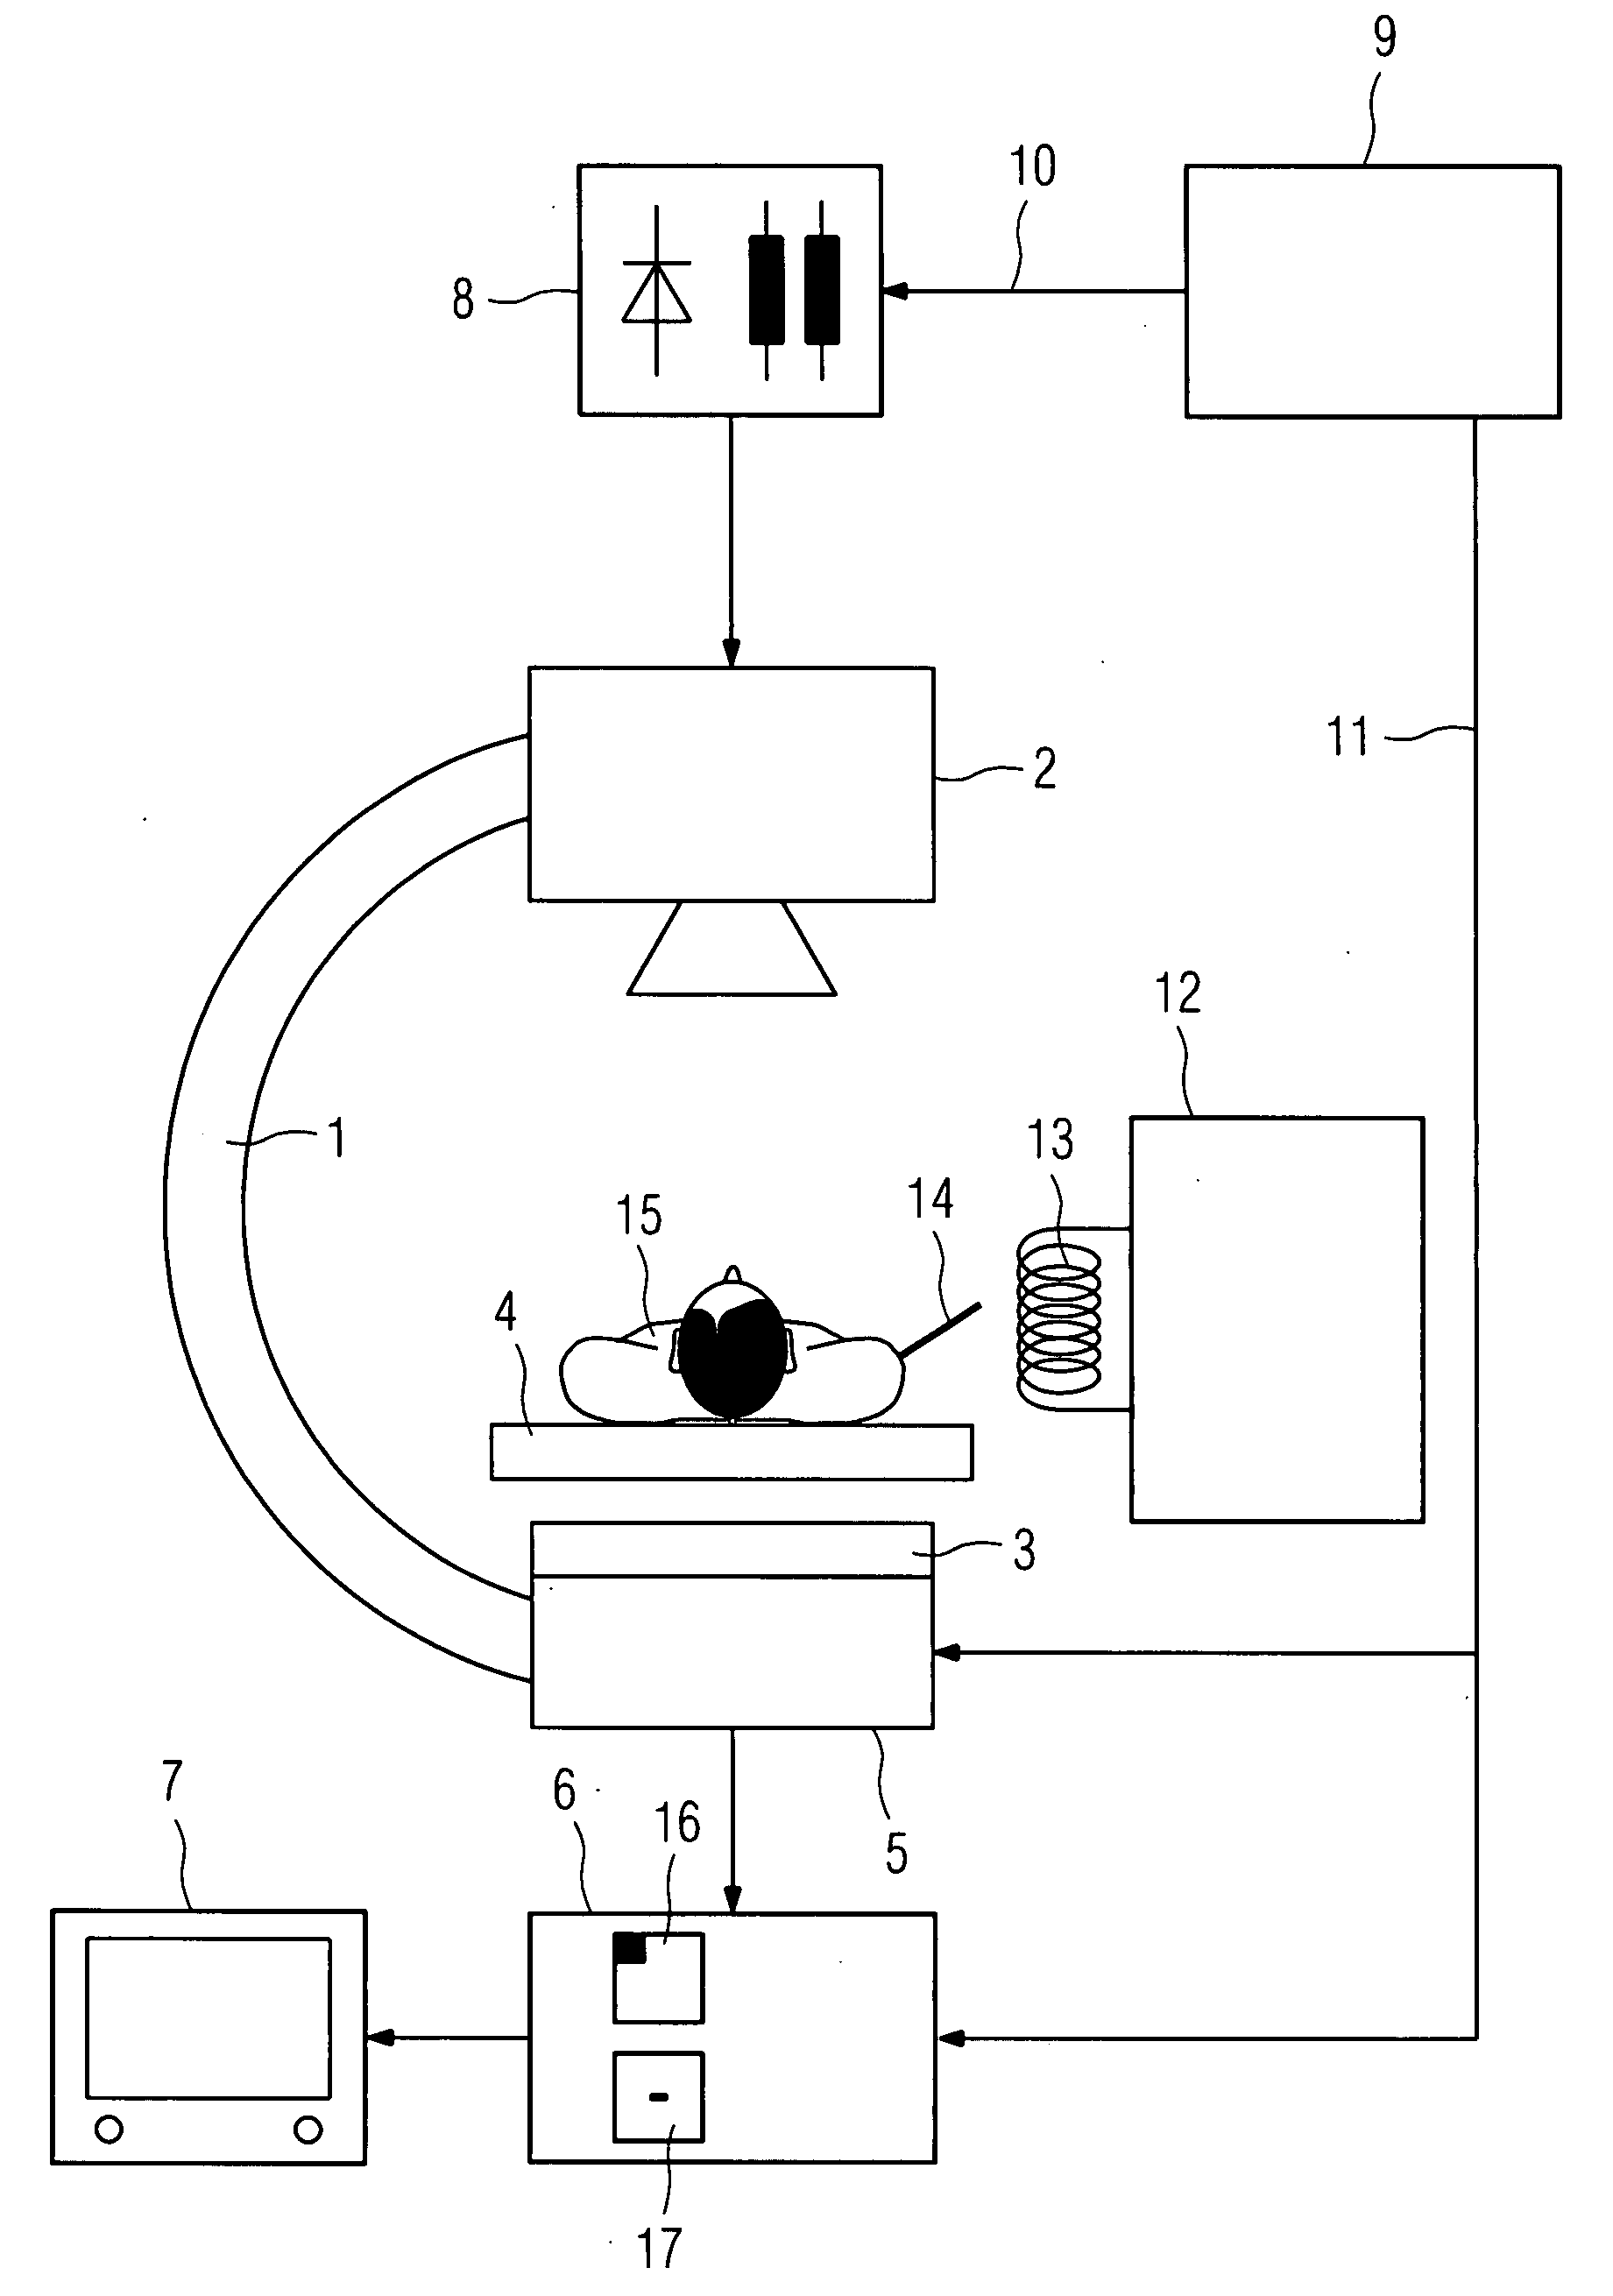 Method for operating a diagnostic apparatus with an x-ray system and a position determination system for catheters together with diagnostic apparatus for performance of the method